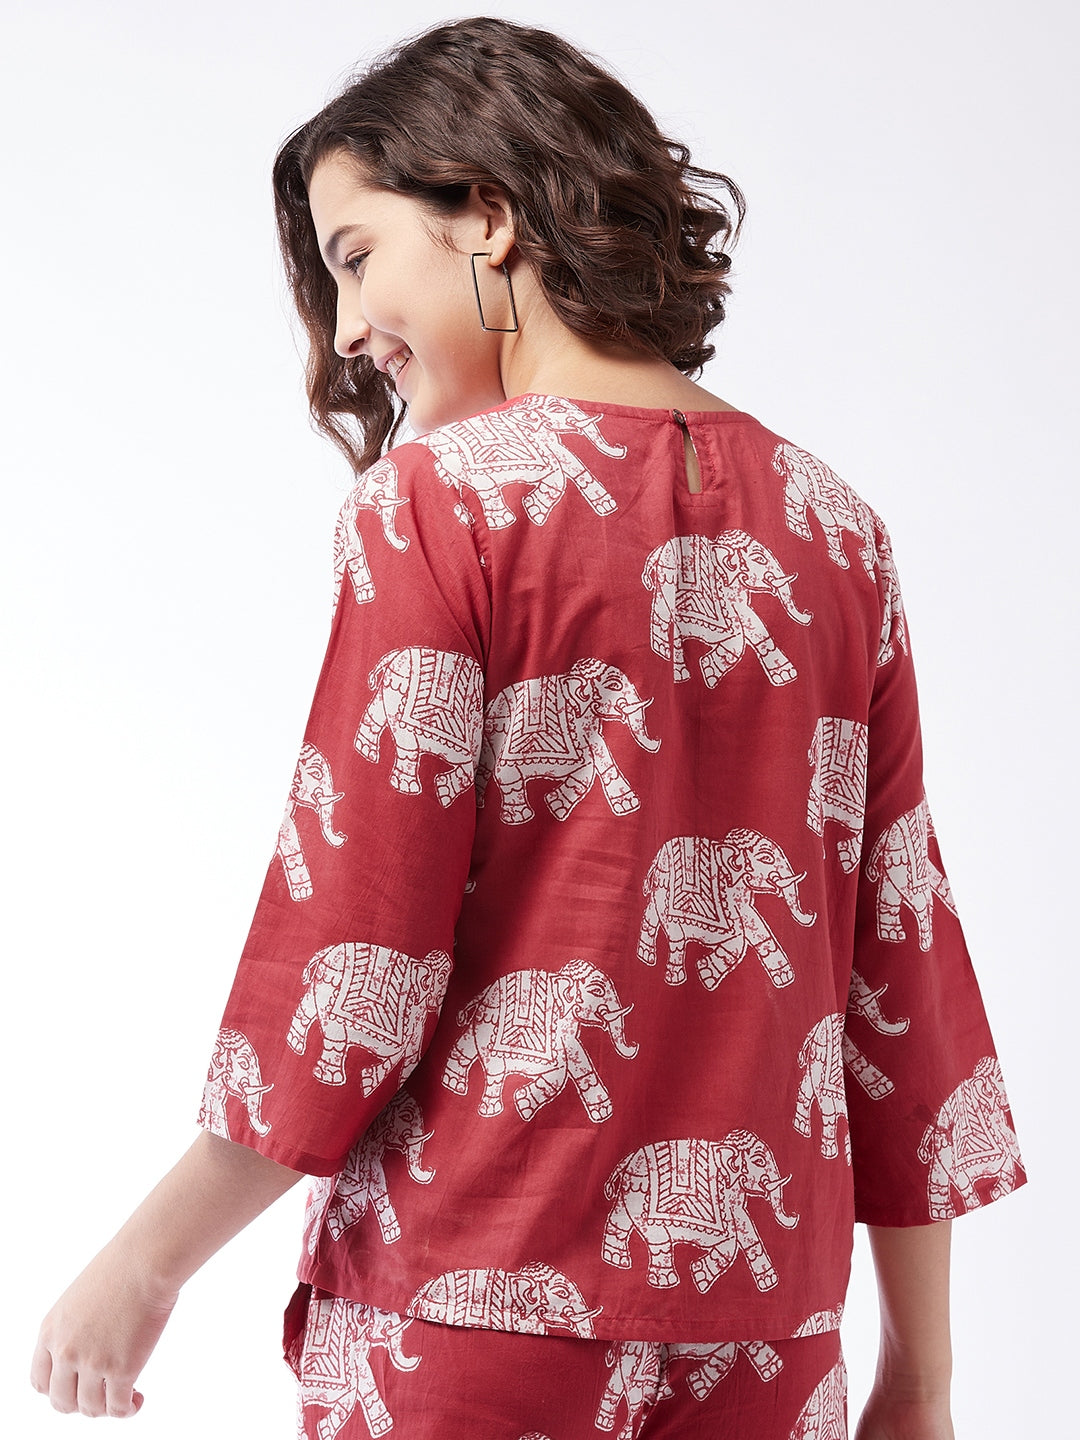 Red Elephant Top For Teens